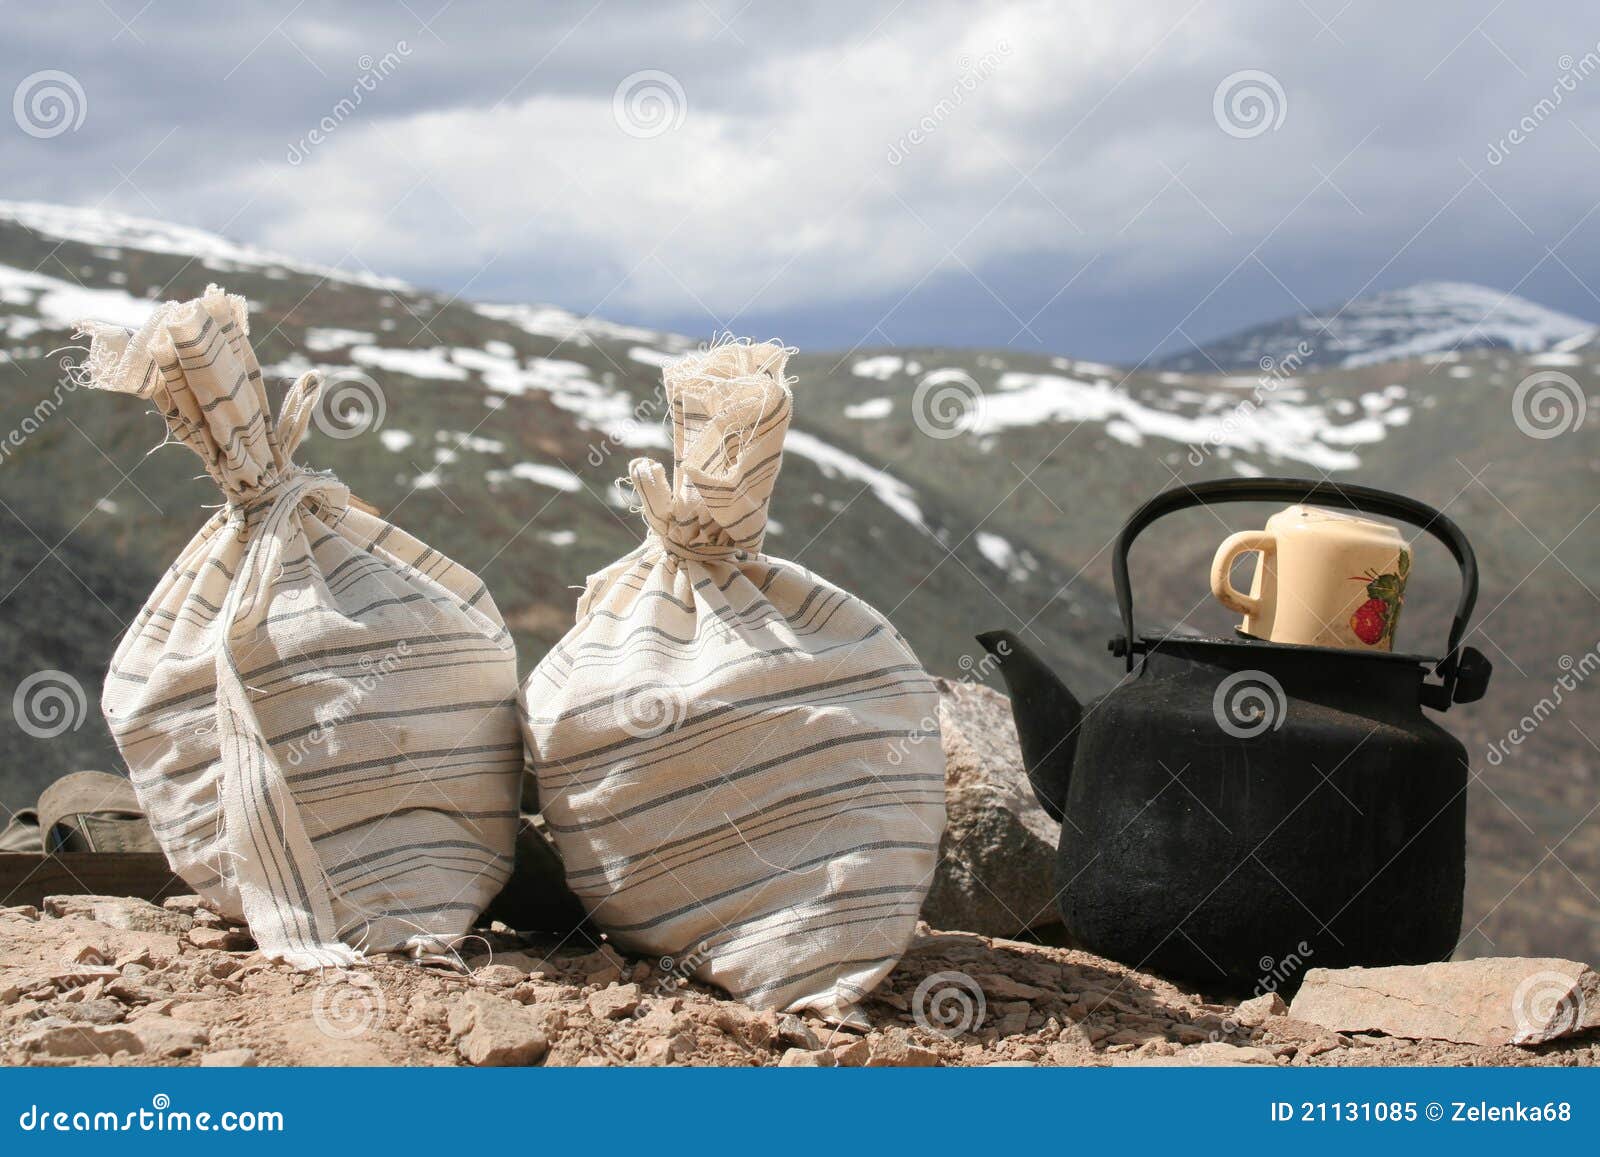 bags with test of the mountain sorts and teapot